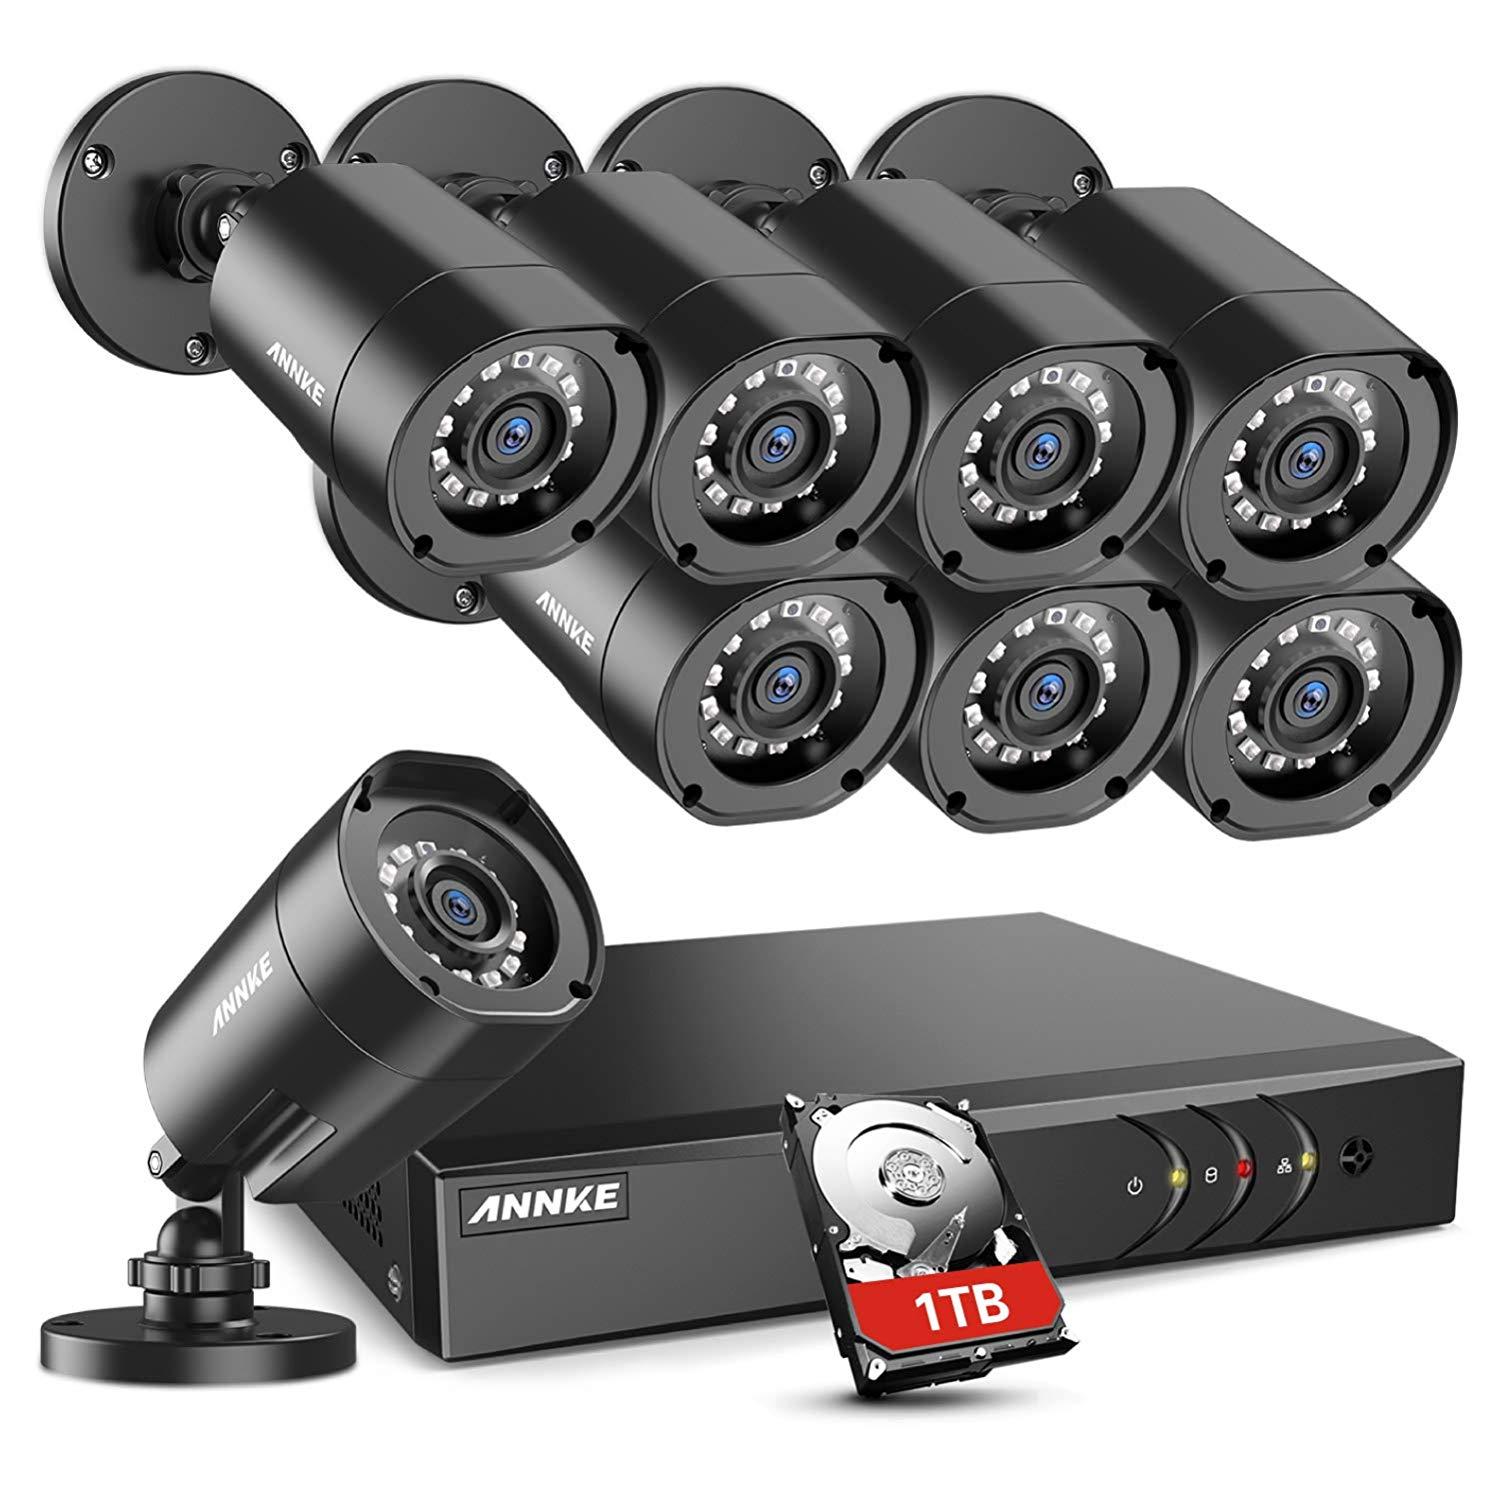 Product ANNKE Home Security Camera System 8 Channel 1080P Lite DVR with 1TB HDD and (8) HD 1080P Outdoor IP66 Weatherproof CCTV Cameras, Smart Playback, Instant email Alert with Images - Gadusa Security image